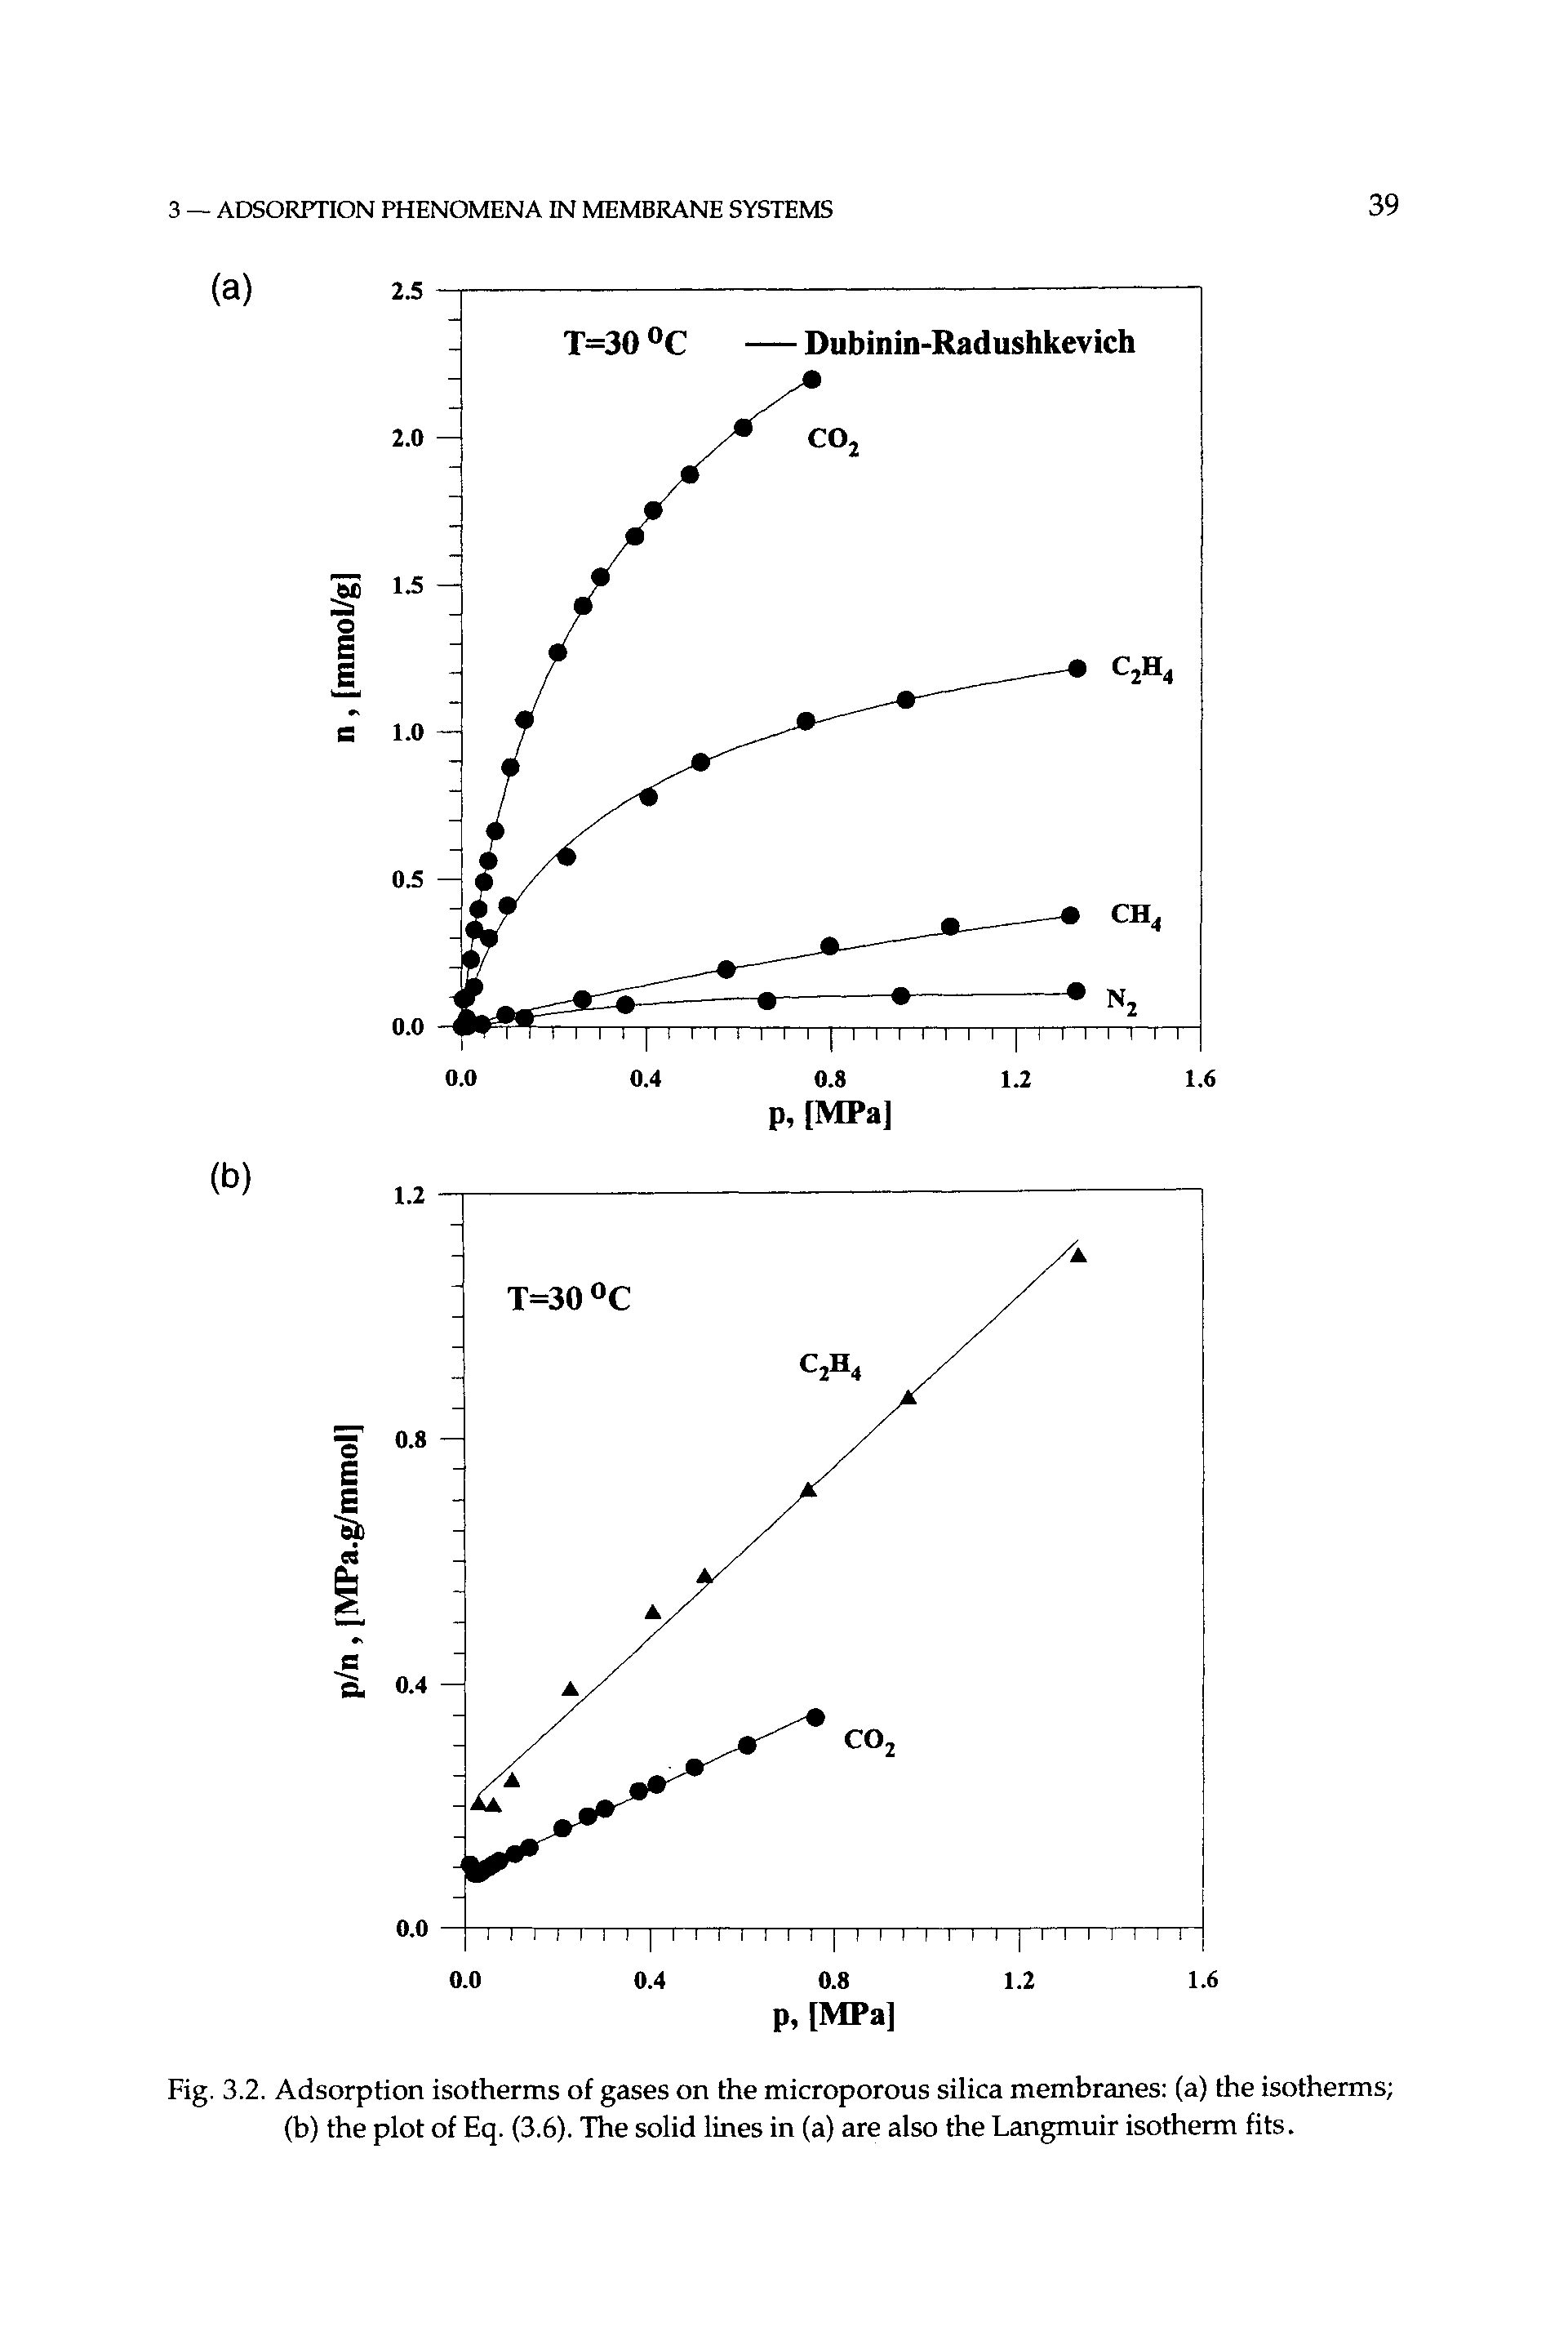 Fig. 3.2. Adsorption isotherms of gases on the microporous silica membranes (a) the isotherms (b) the plot of Eq. (3.6). The solid lines in (a) are also the Langmuir isotherm fits.